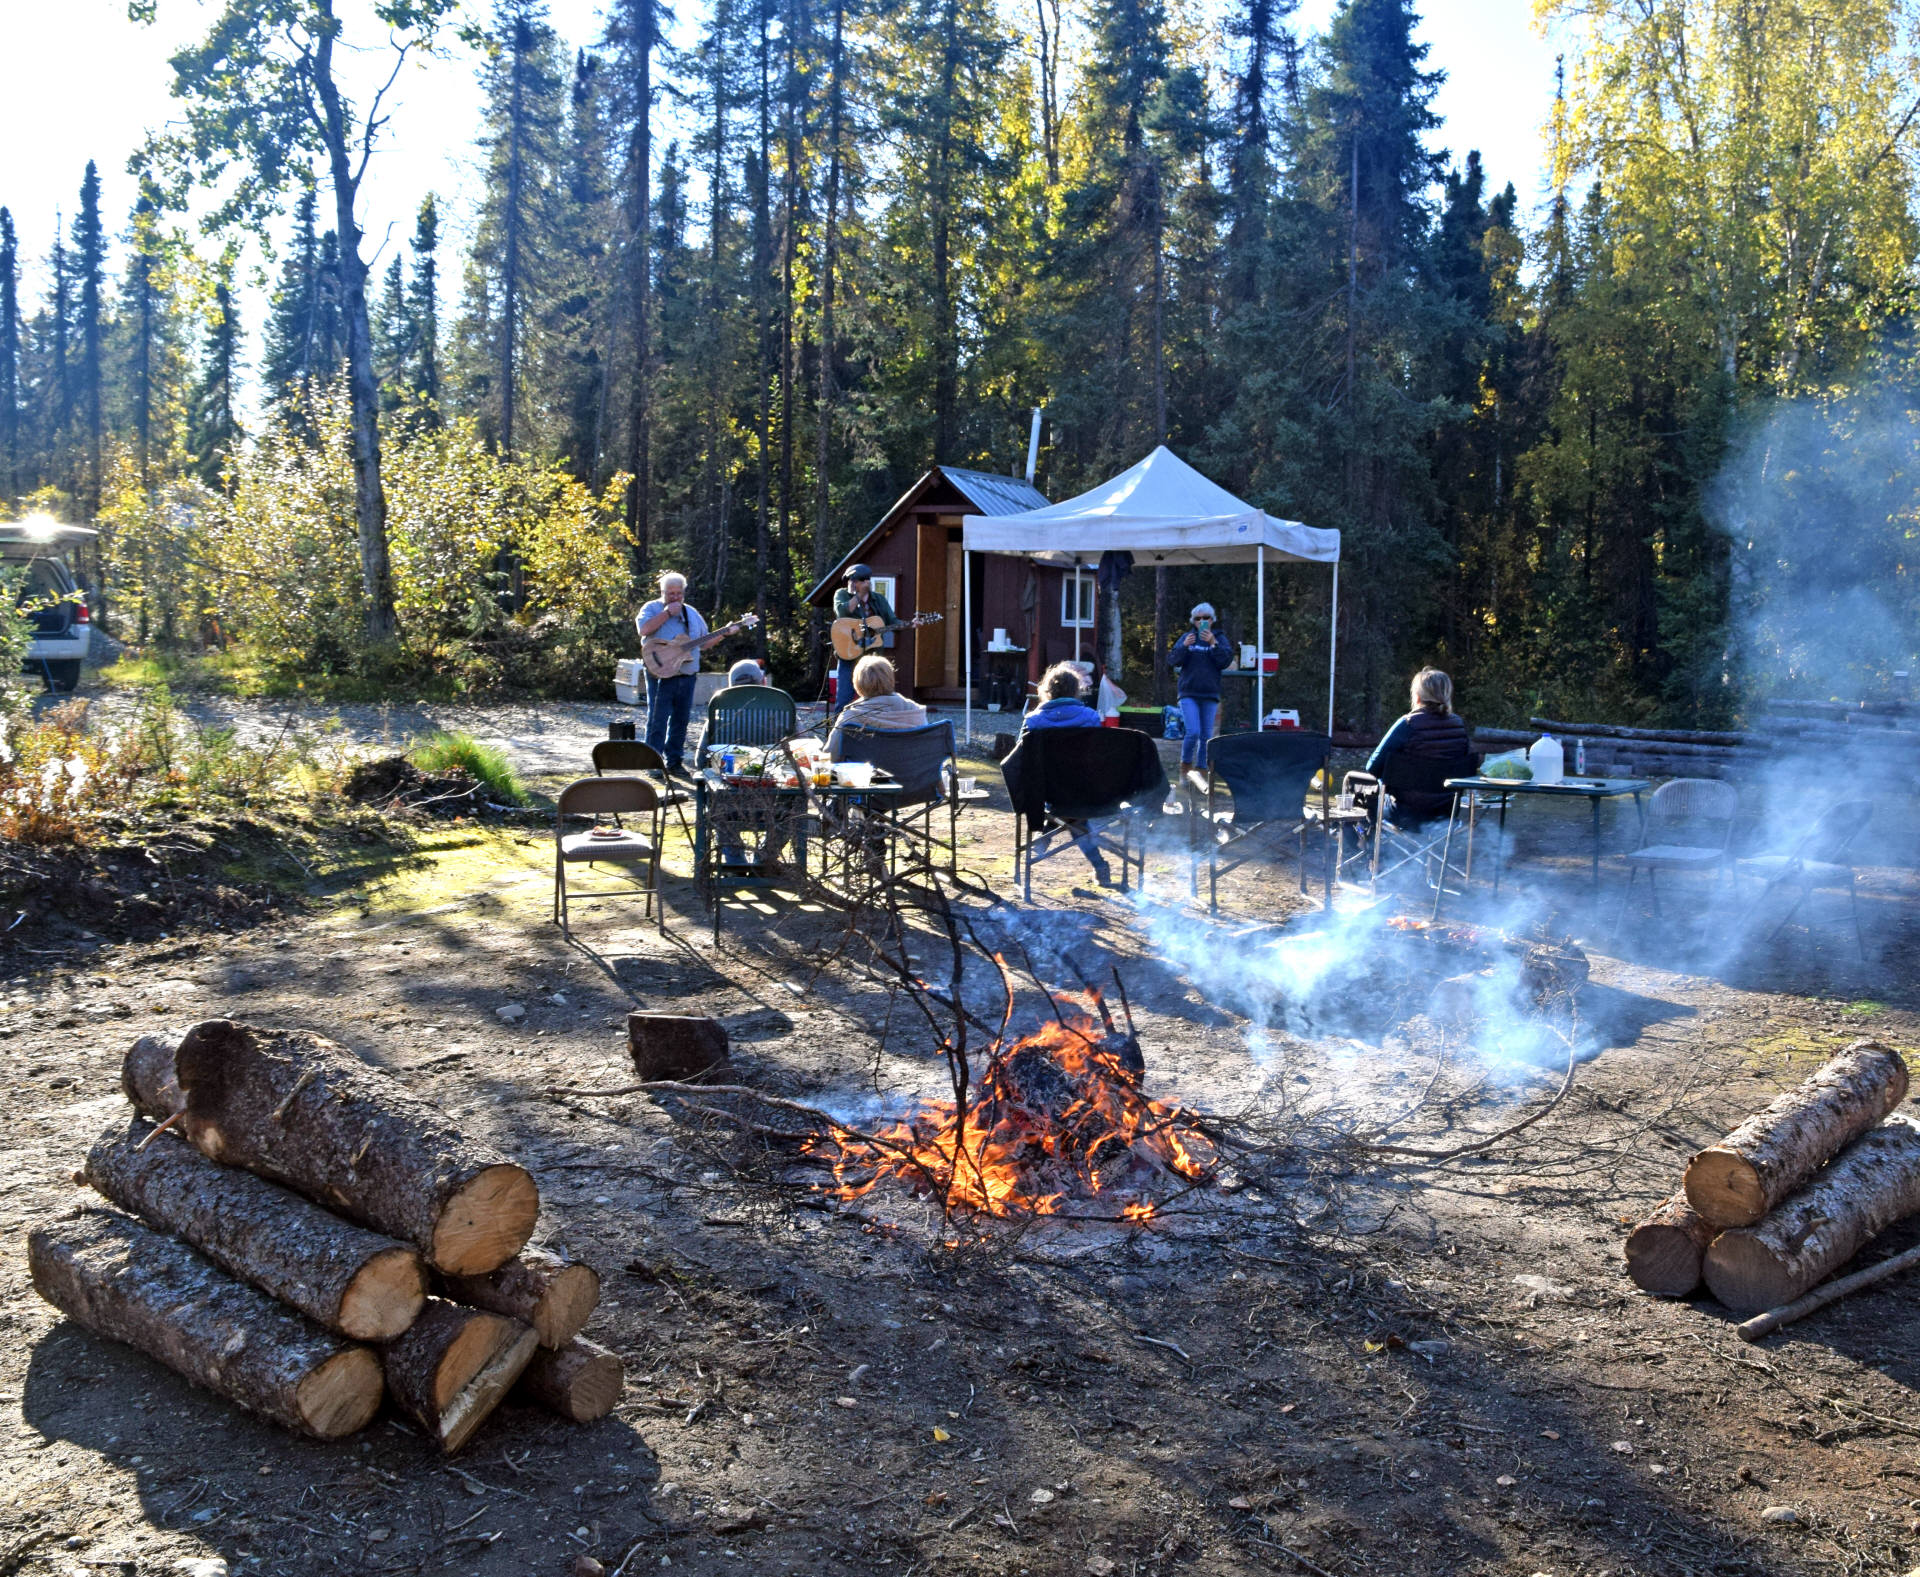 Picnic for 10 people with campfire. Unlimited amount of firewood is free to use! For picnics, gatherings and weddings of any size, you are required to bring your own tents, tables and chairs.